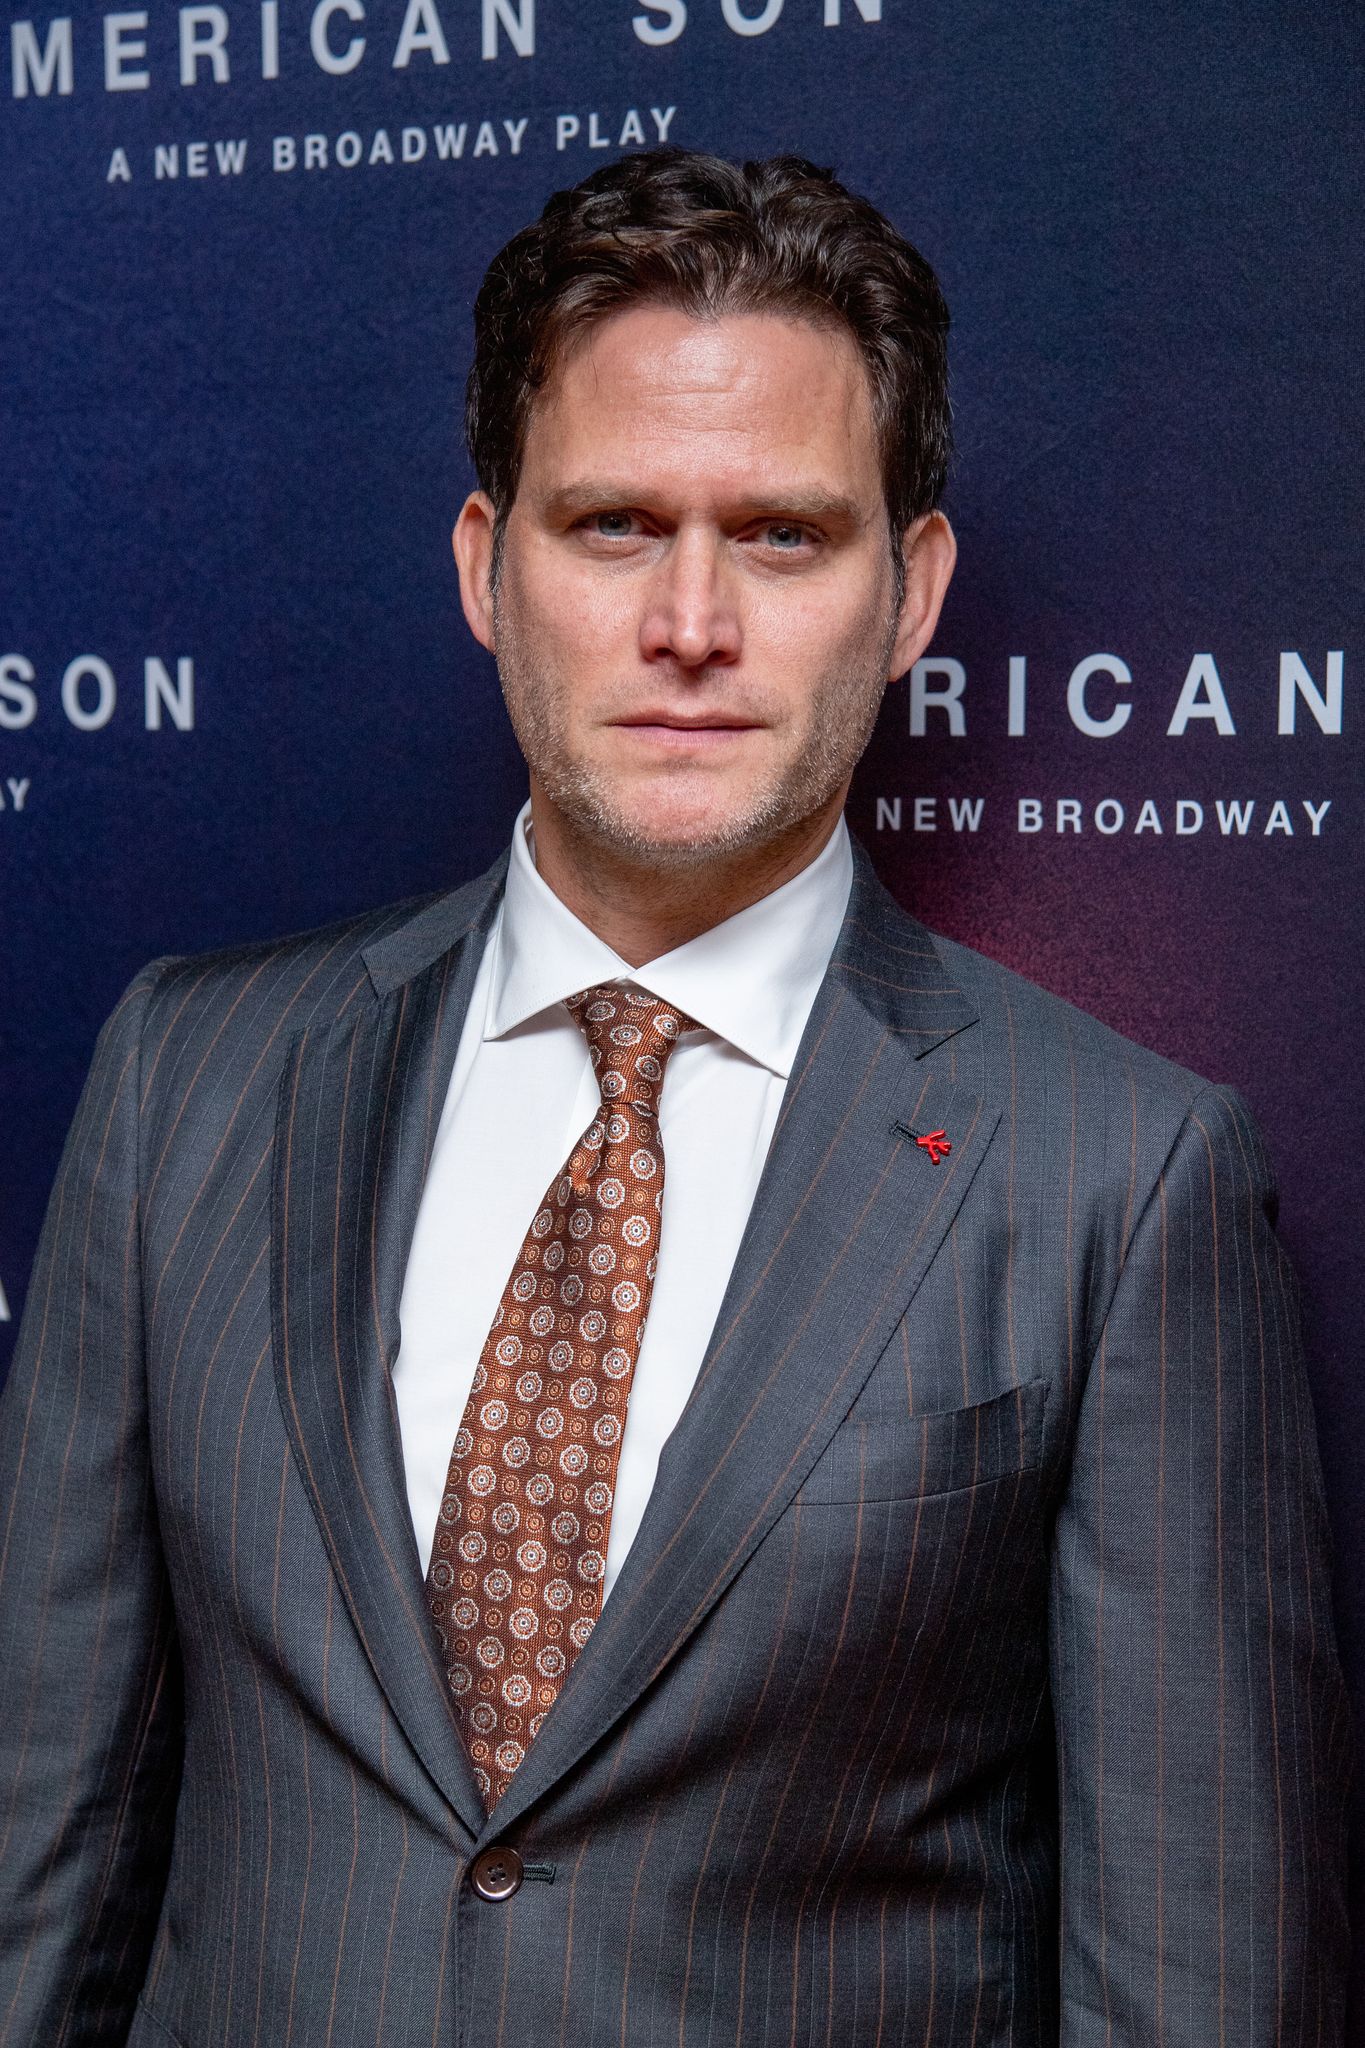 Steven Pasquale at the opening night of "American Son" in 2018 in New York City | Source: Getty Images